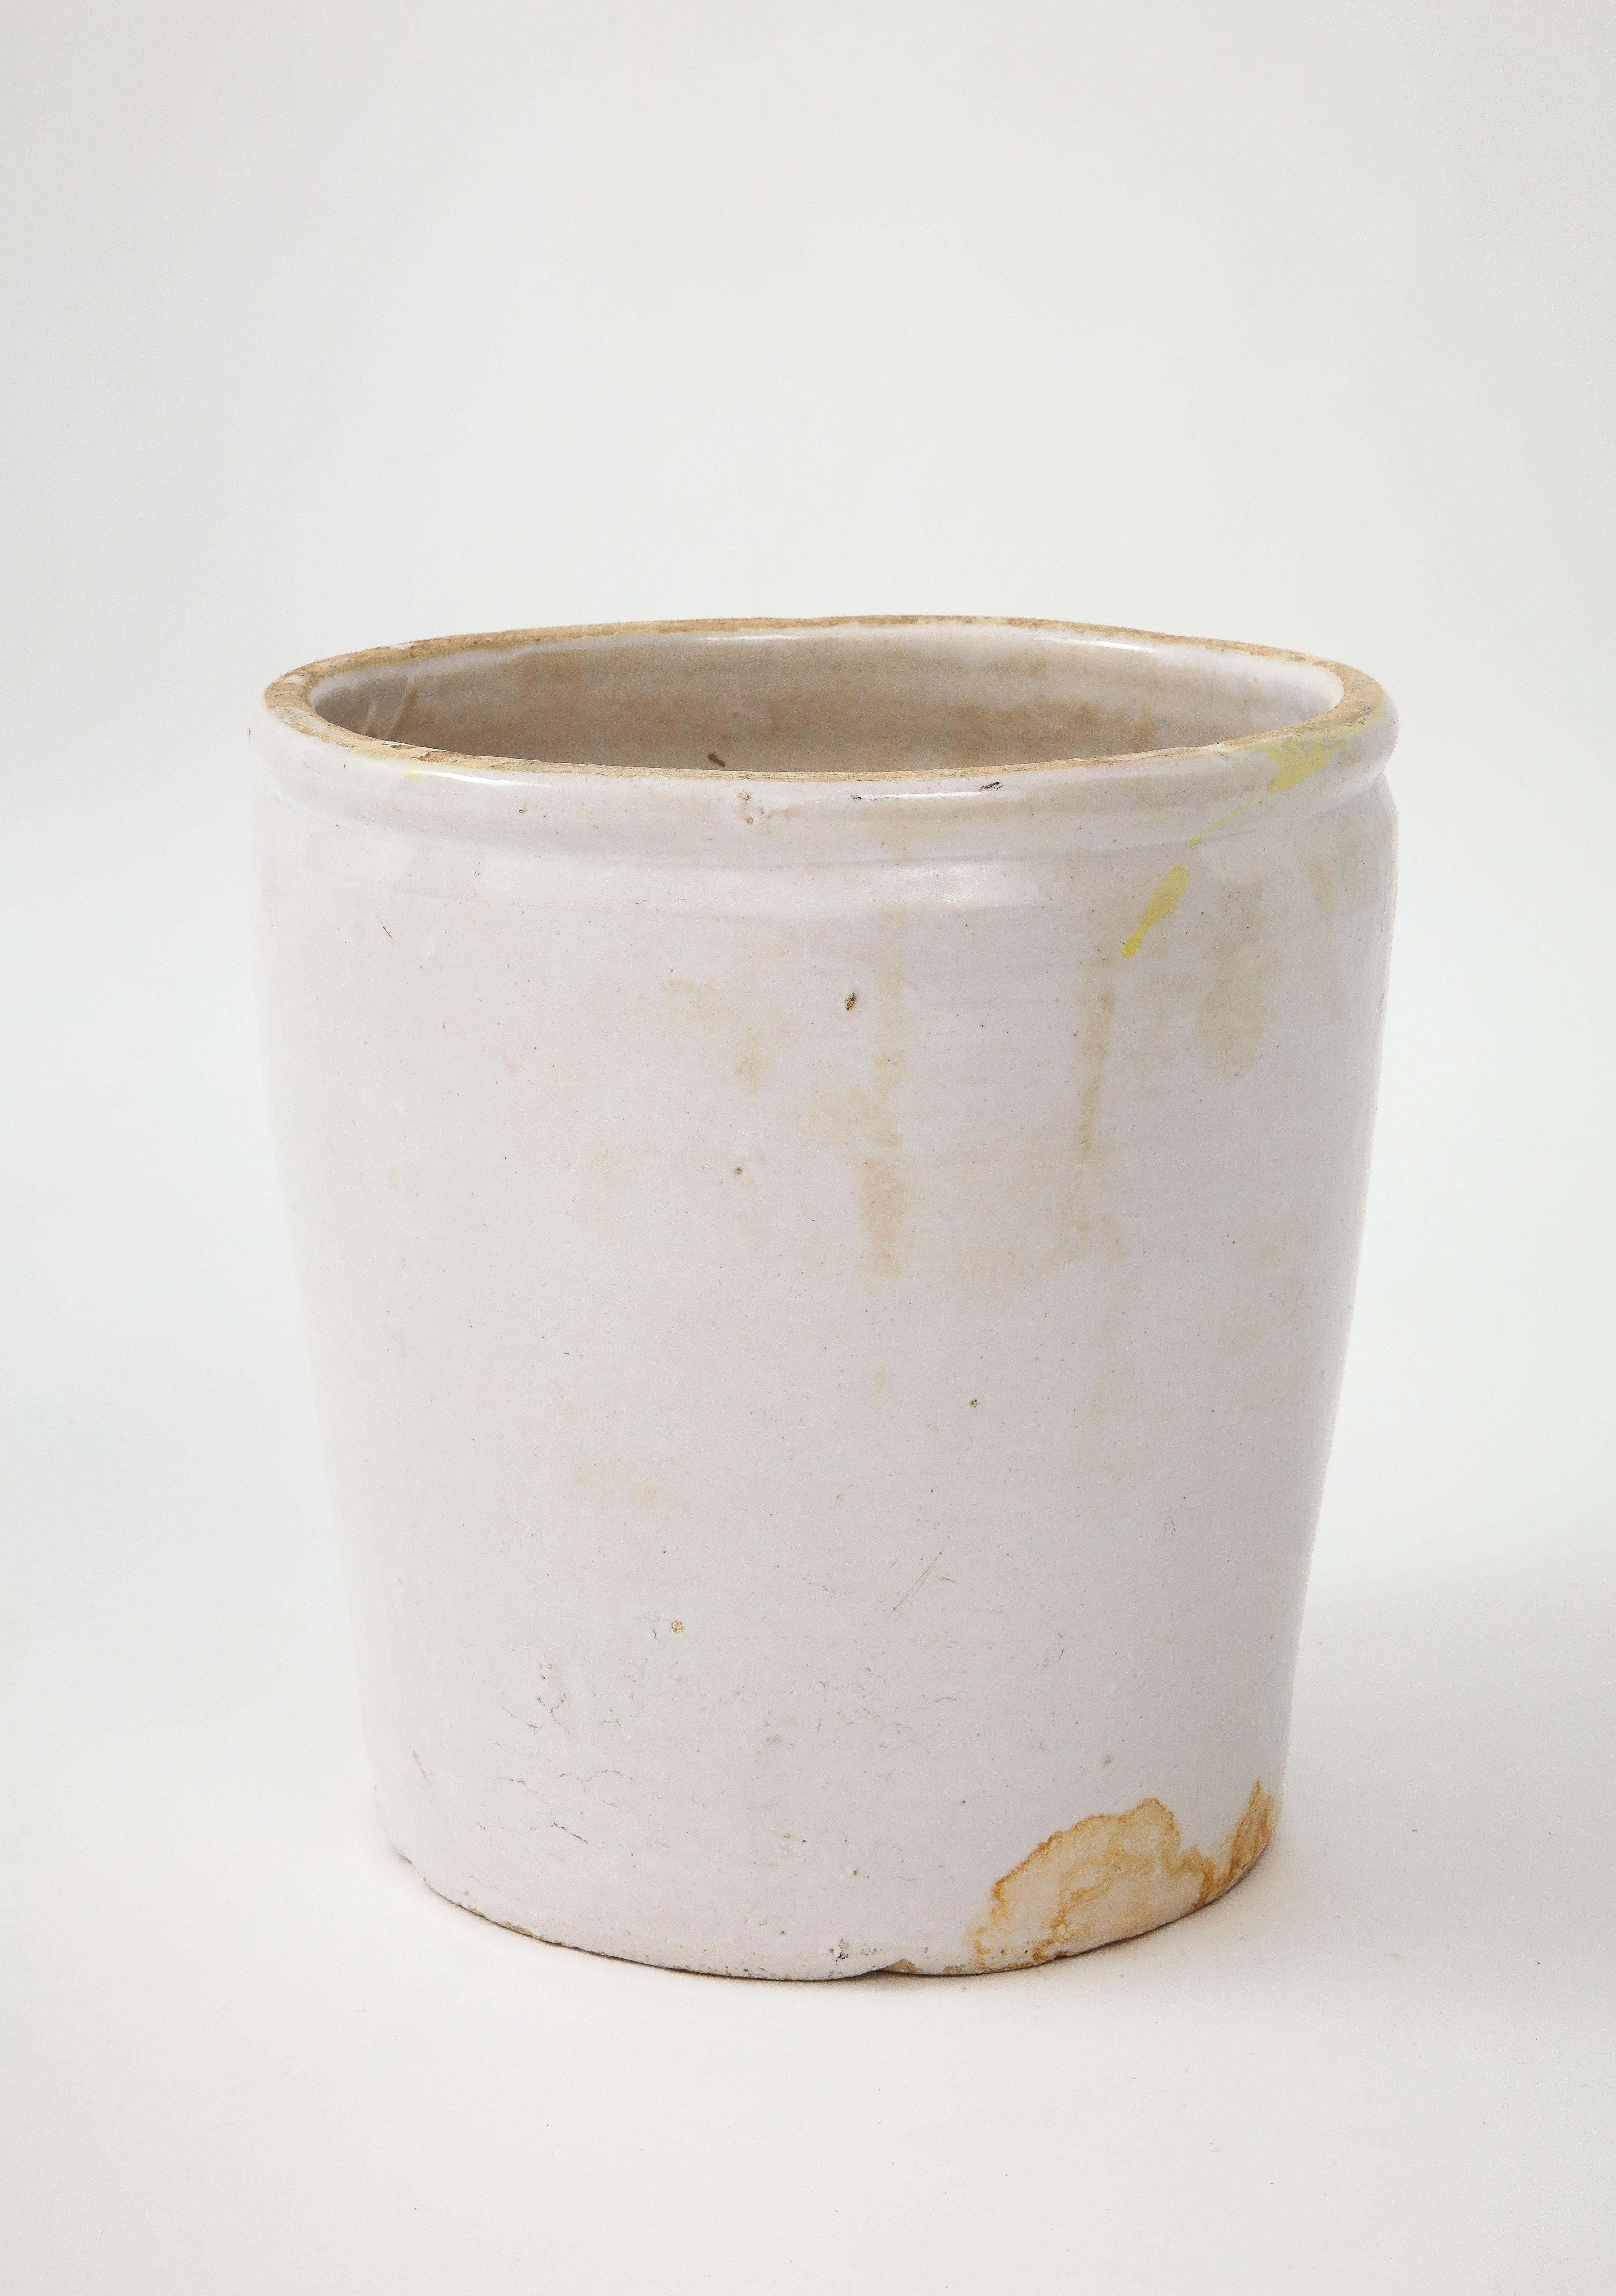 Small 19th century French confit pot or jar. Handcrafted. Originally used to store and preserve food.